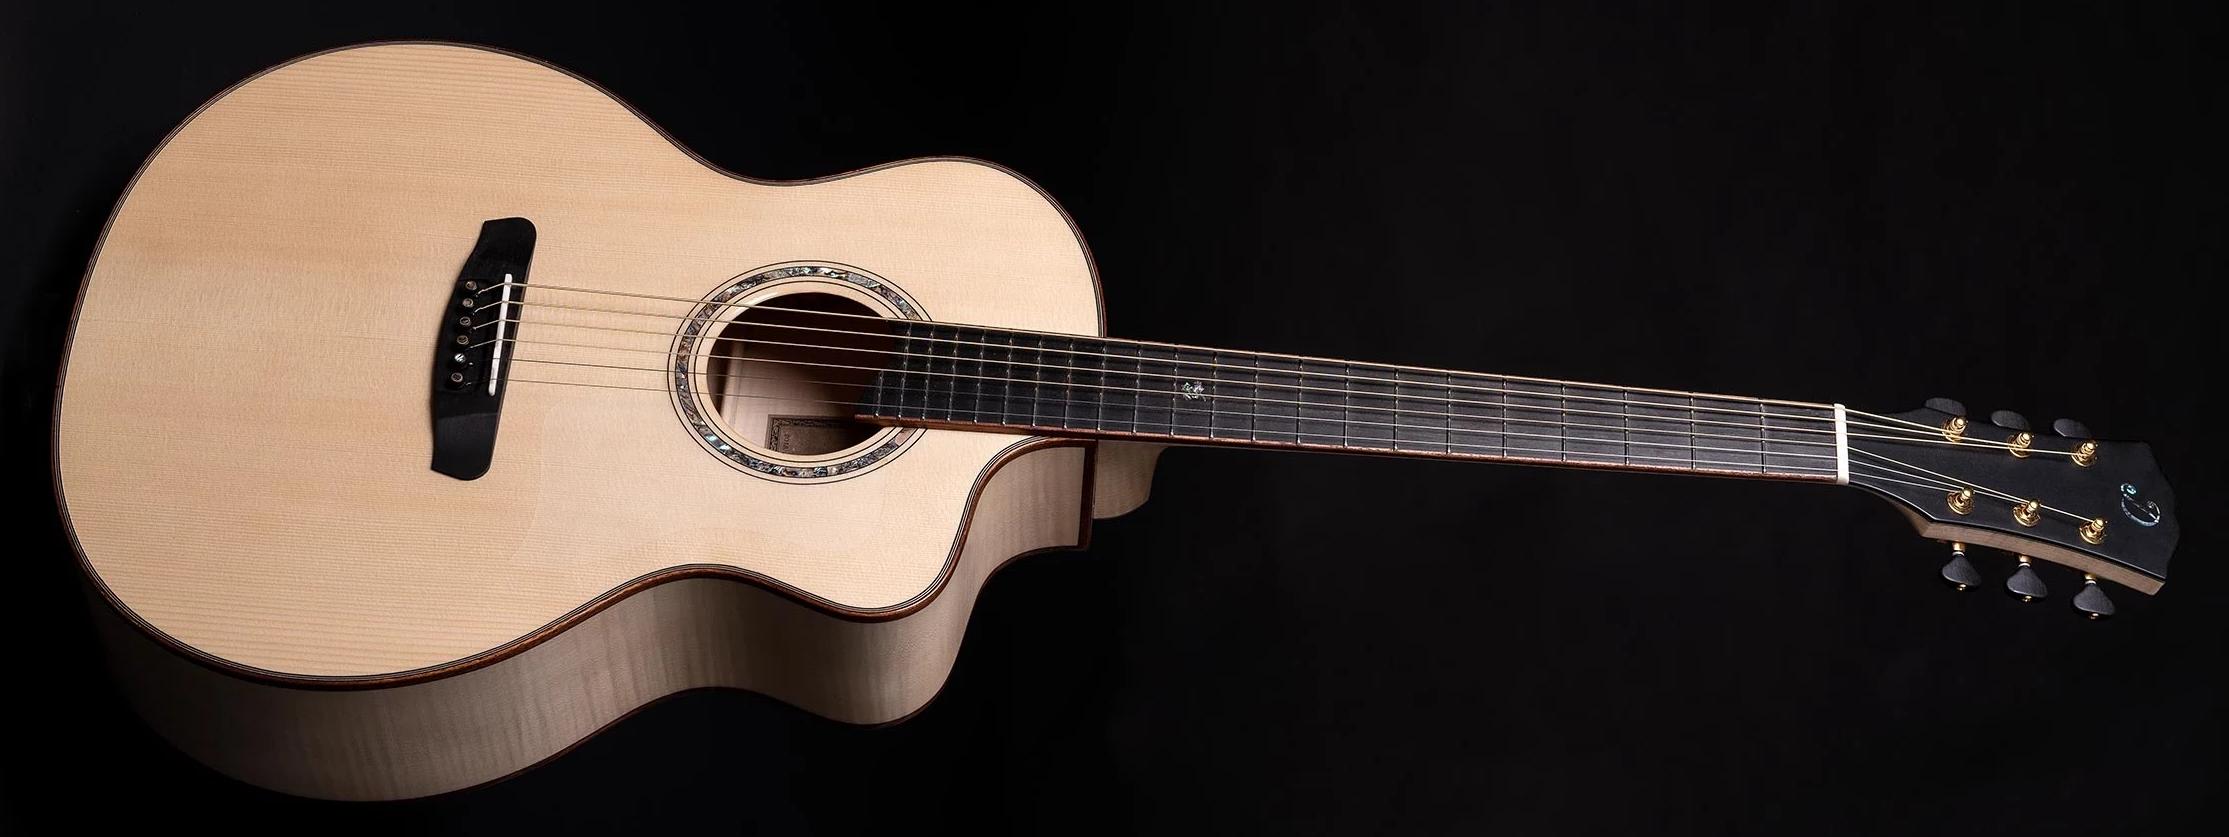 Dowina Maple SWS Jumbo (Acero), Acoustic Guitar for sale at Richards Guitars.